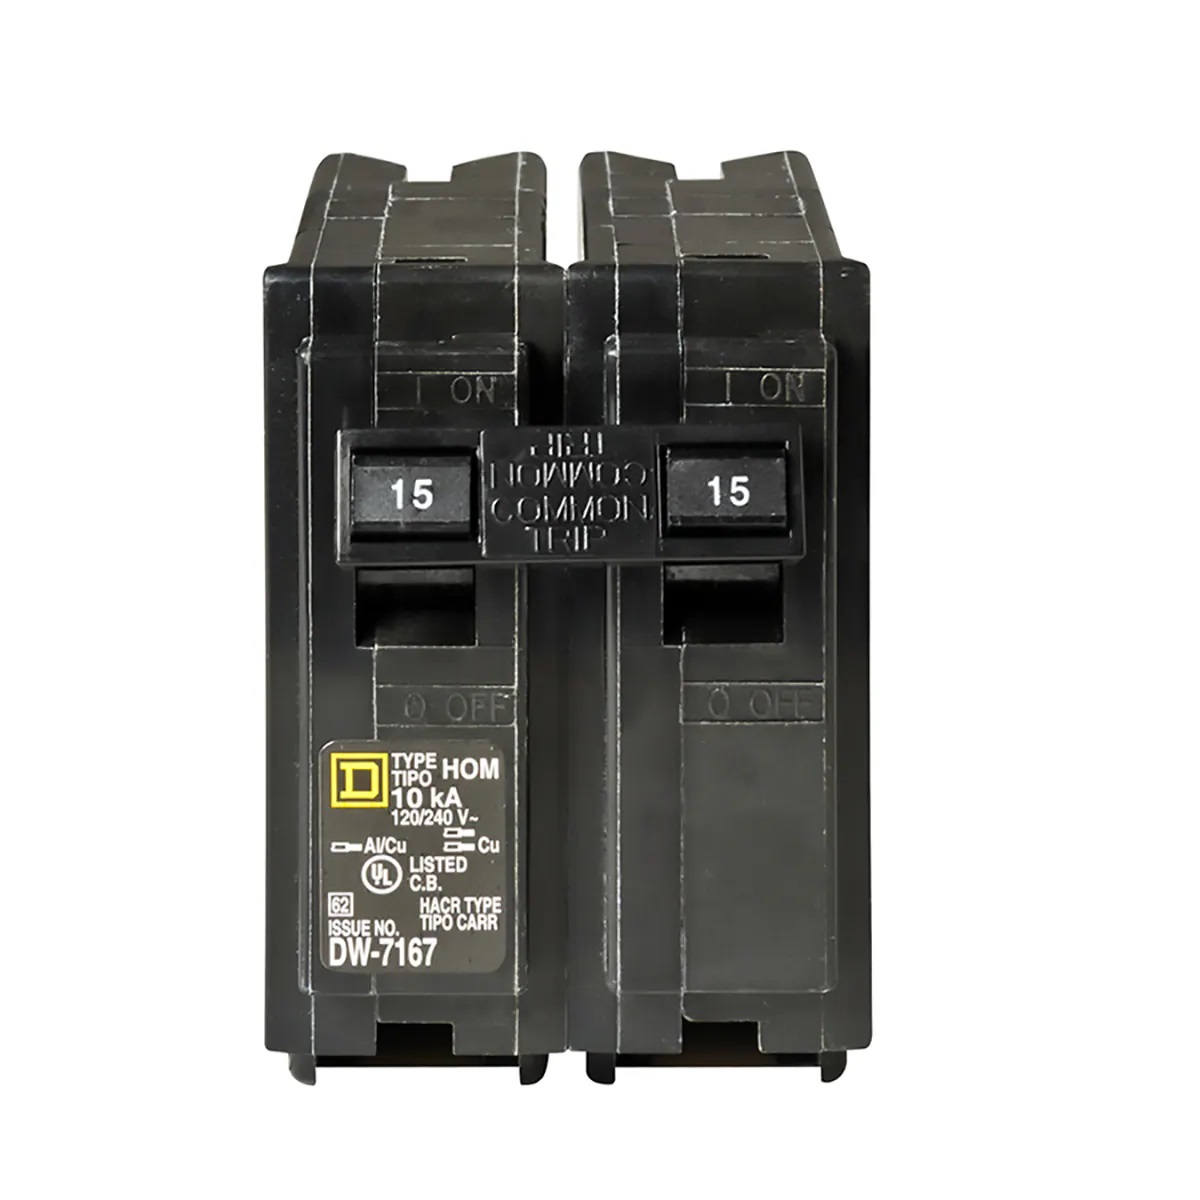 What Are 15 Amp Breakers Used For